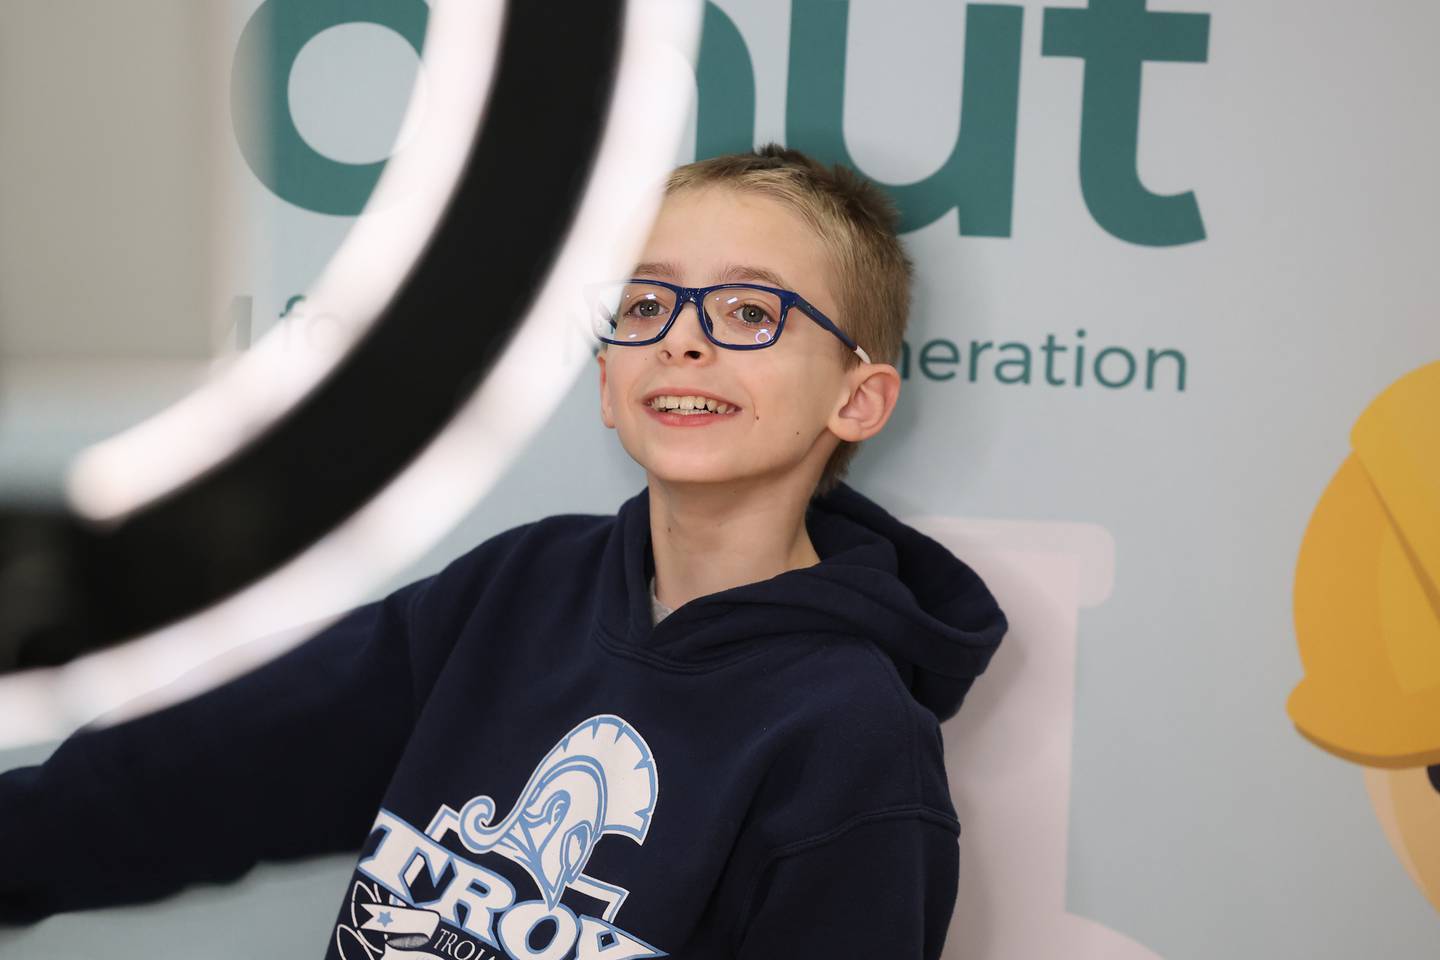 Jayden Stilwell, 11, poses for a photo at the After the Peanut booth at the Will County Executive 2024 Kids’ Fair at Troy Middle School in Plainfield on Monday, Feb. 19, 2024.